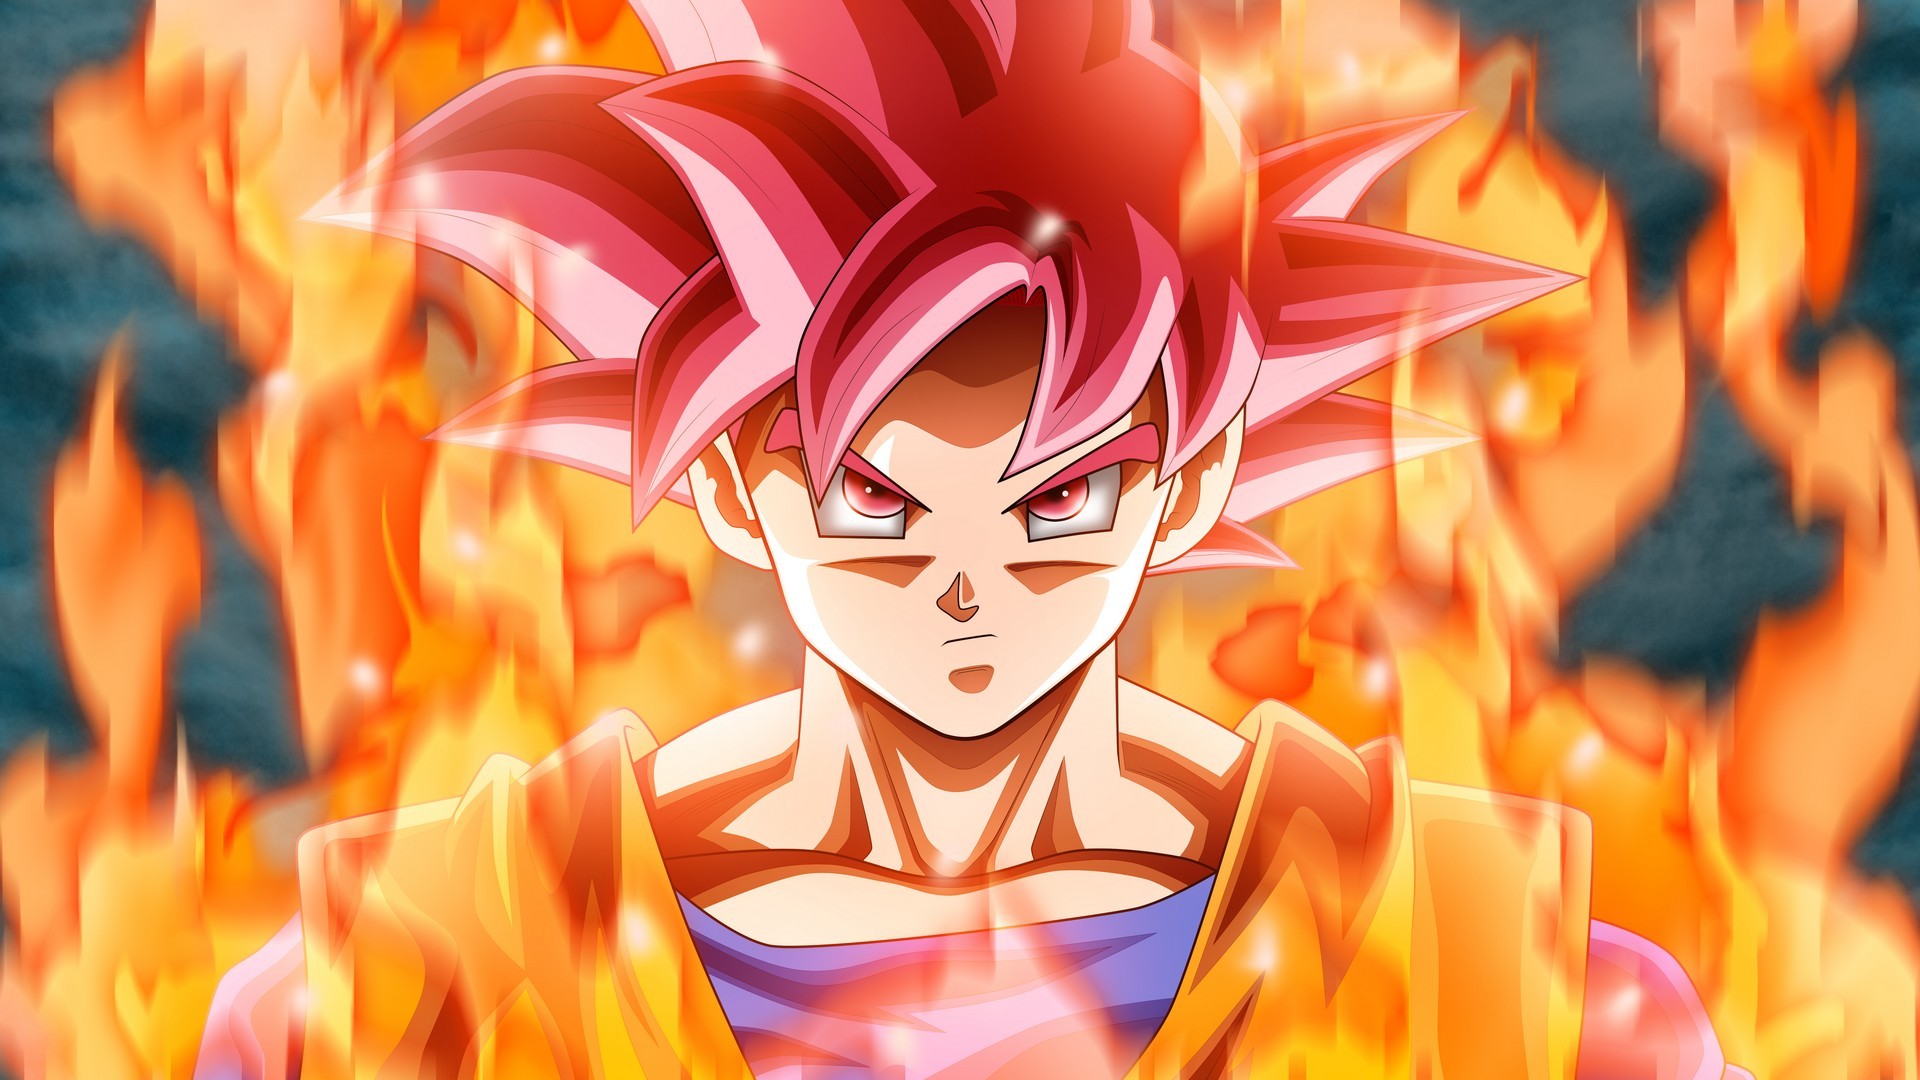 Best Goku Super Saiyan God Wallpaper HD With Resolution 1920X1080 pixel. You can make this wallpaper for your Desktop Computer Backgrounds, Mac Wallpapers, Android Lock screen or iPhone Screensavers